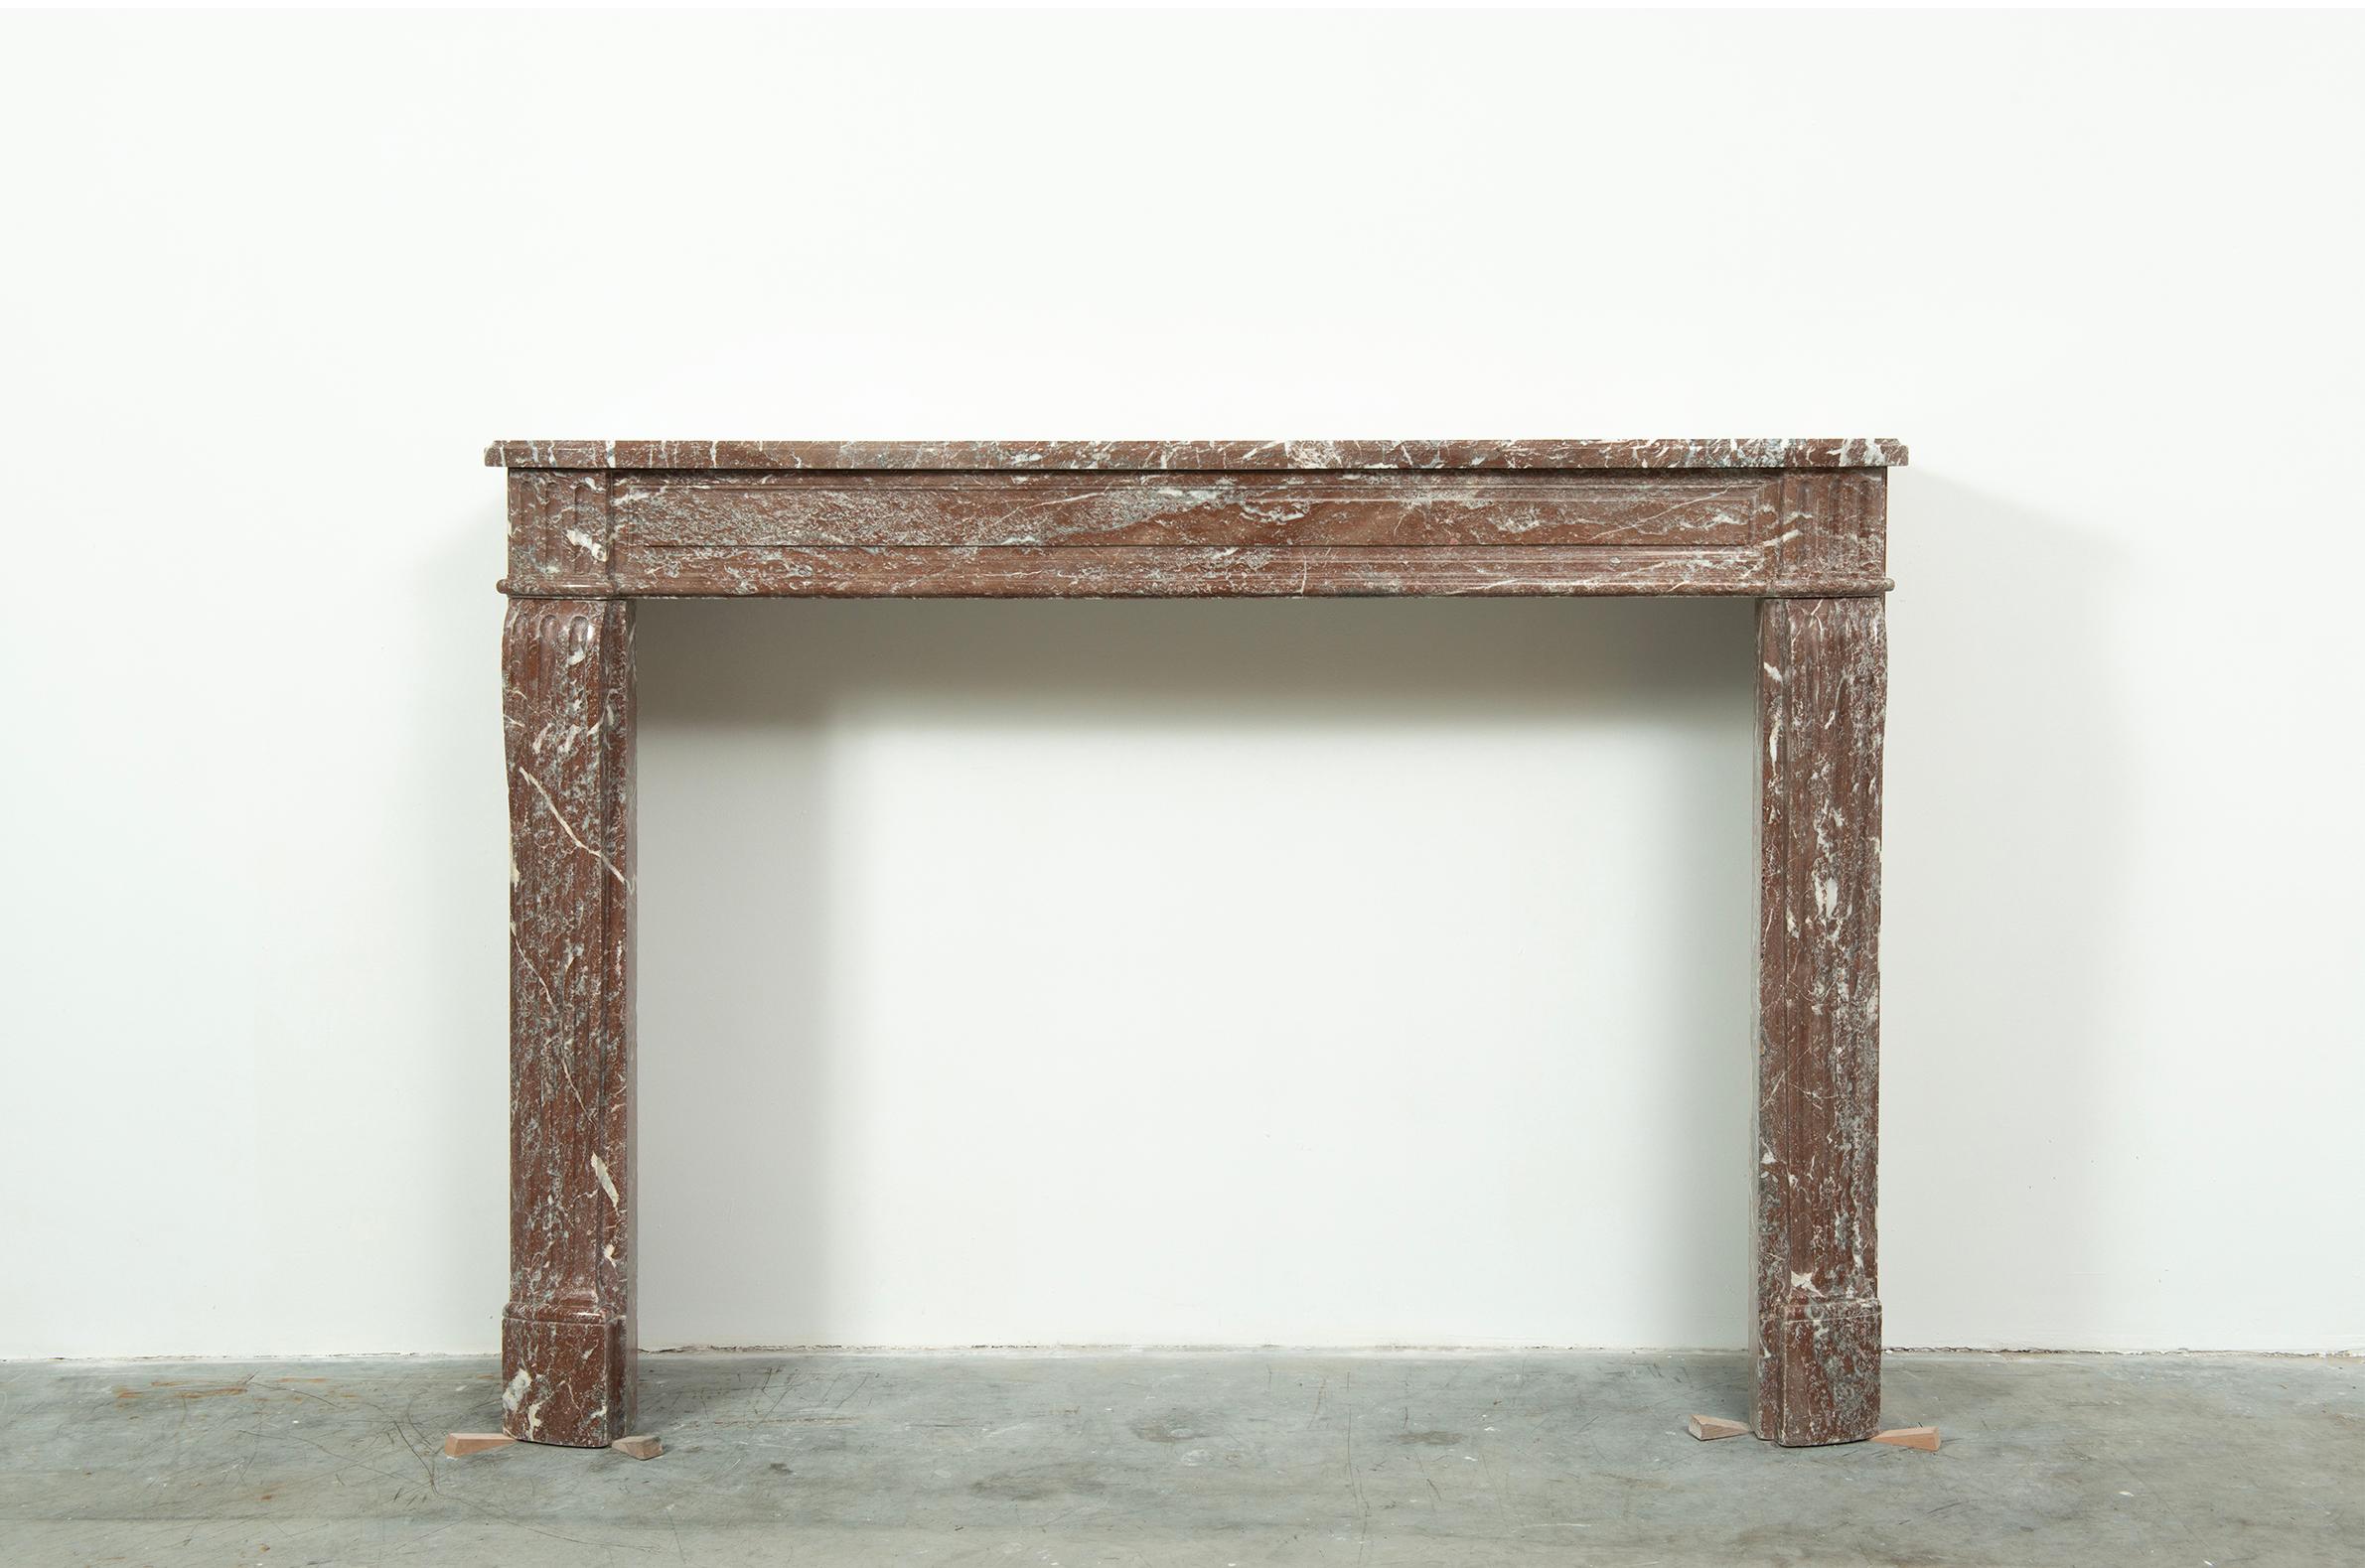 Antique French Louis XVI Fireplace Mantel.

A nice style correct Louis XVI Fireplace from Paris in France.
The profiled topshelf has a nice subtle rounded shape above the paneled frieze with fluted endblocks above curved, fluted and rounded jambs